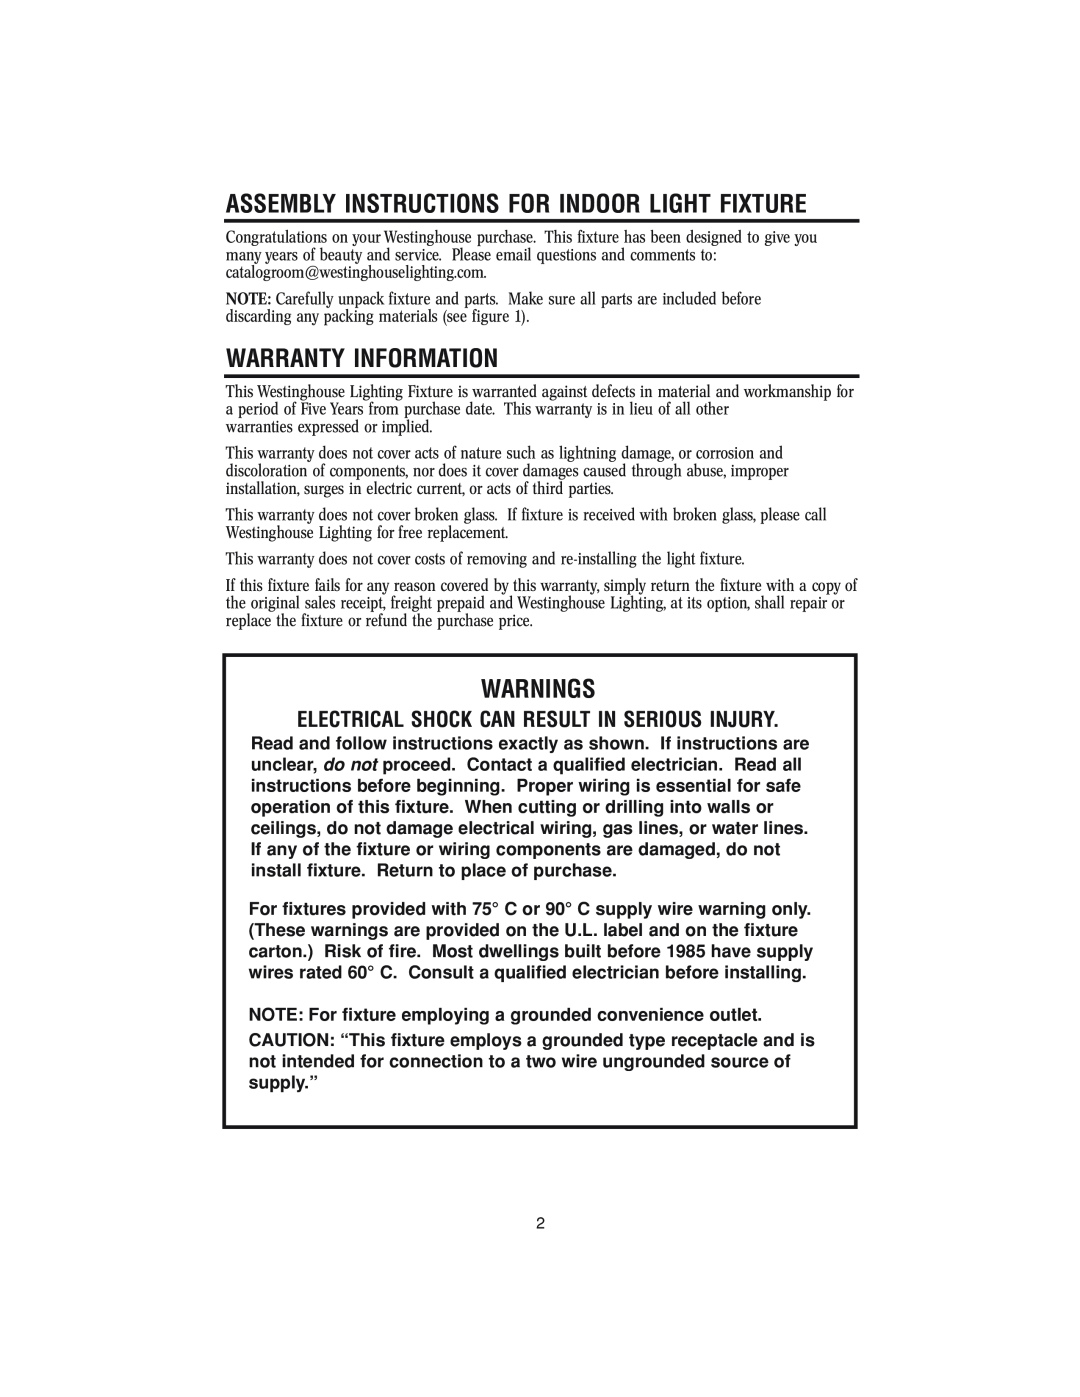 Westinghouse W-145 owner manual Warranty Information, Warnings, Assembly Instructions For Indoor Light Fixture 